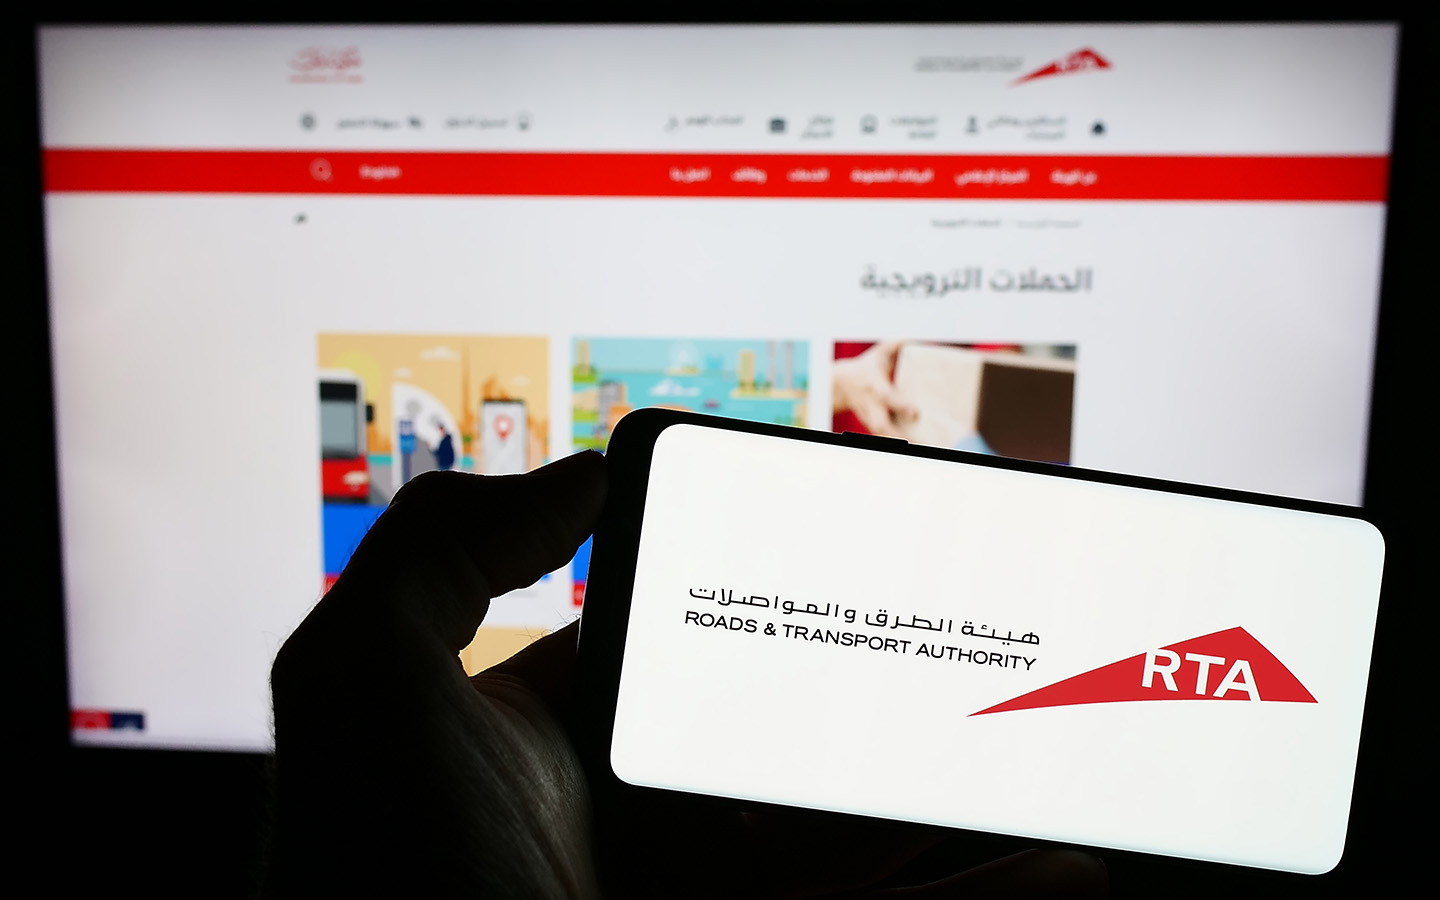 the initiative by RTA fast paces the vehicle transfer process